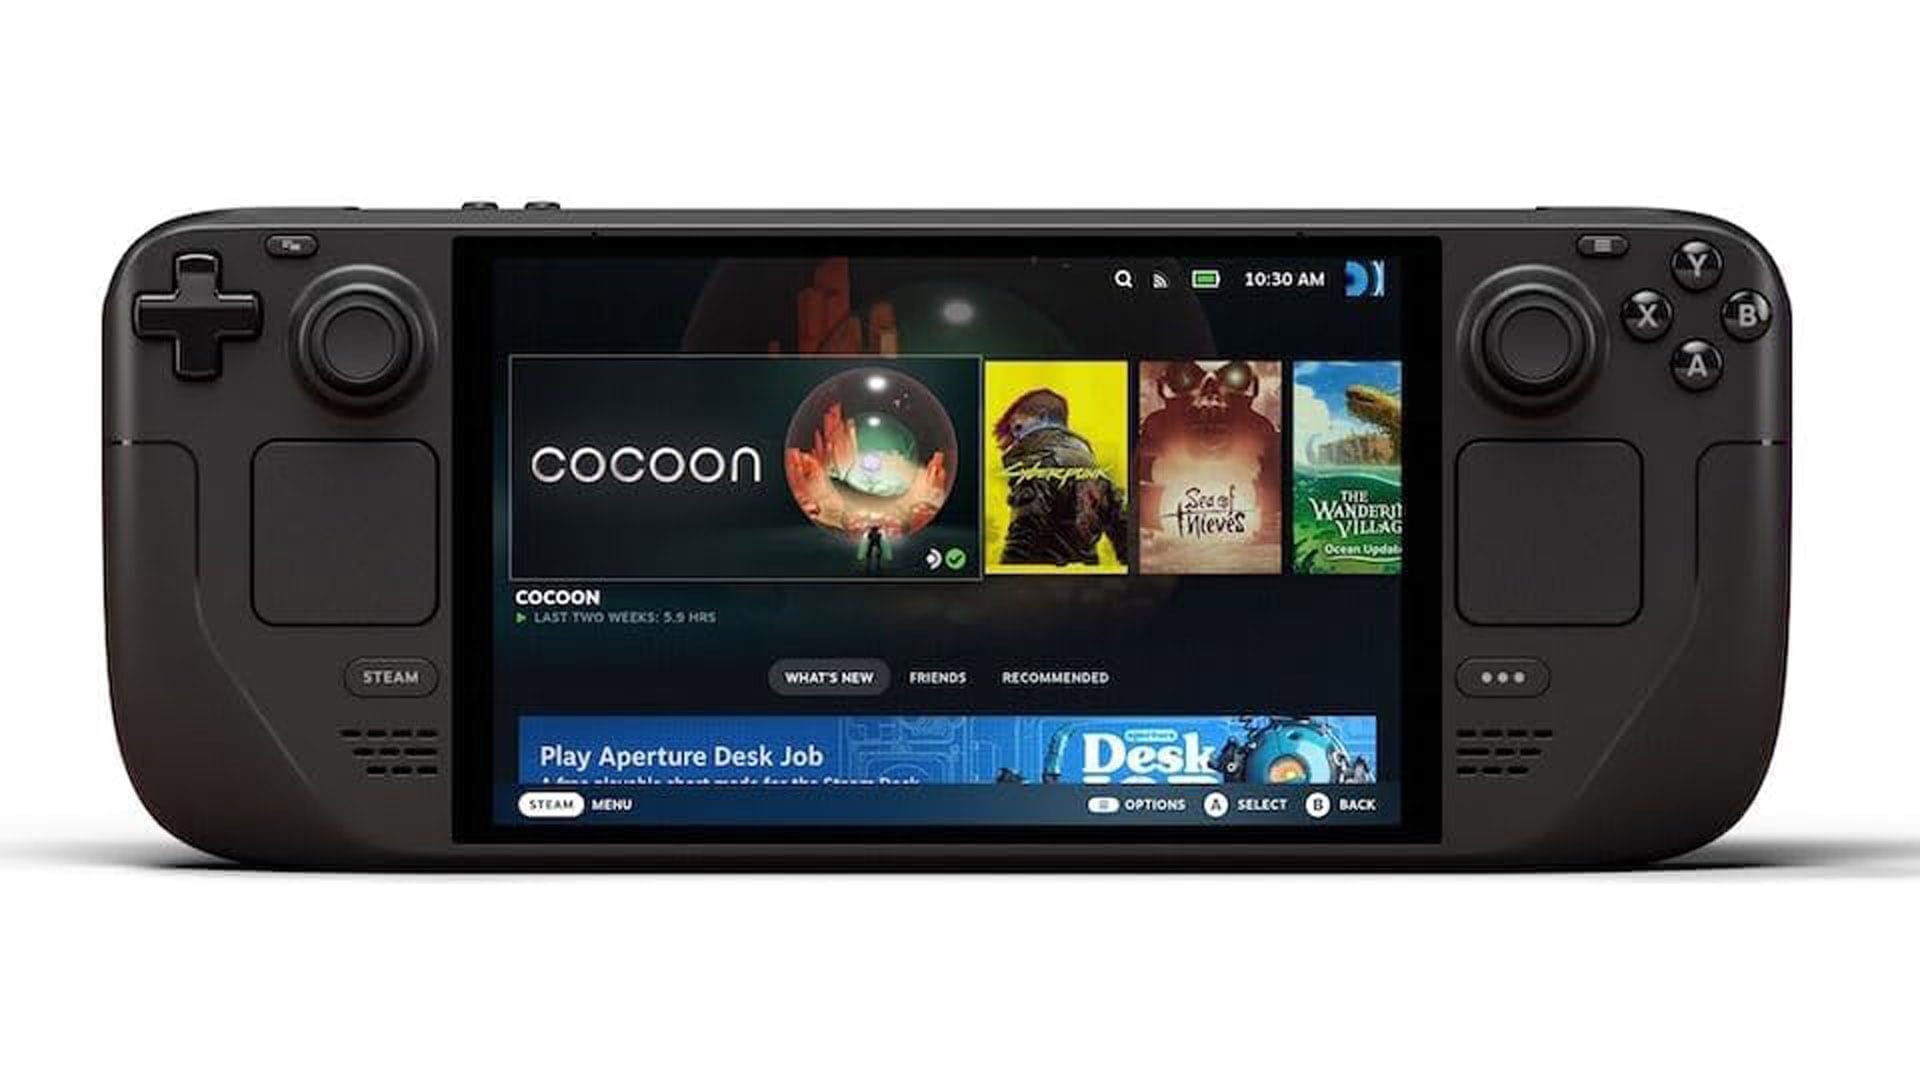 Steam Deck OLED model showcasing the device's screen and controls